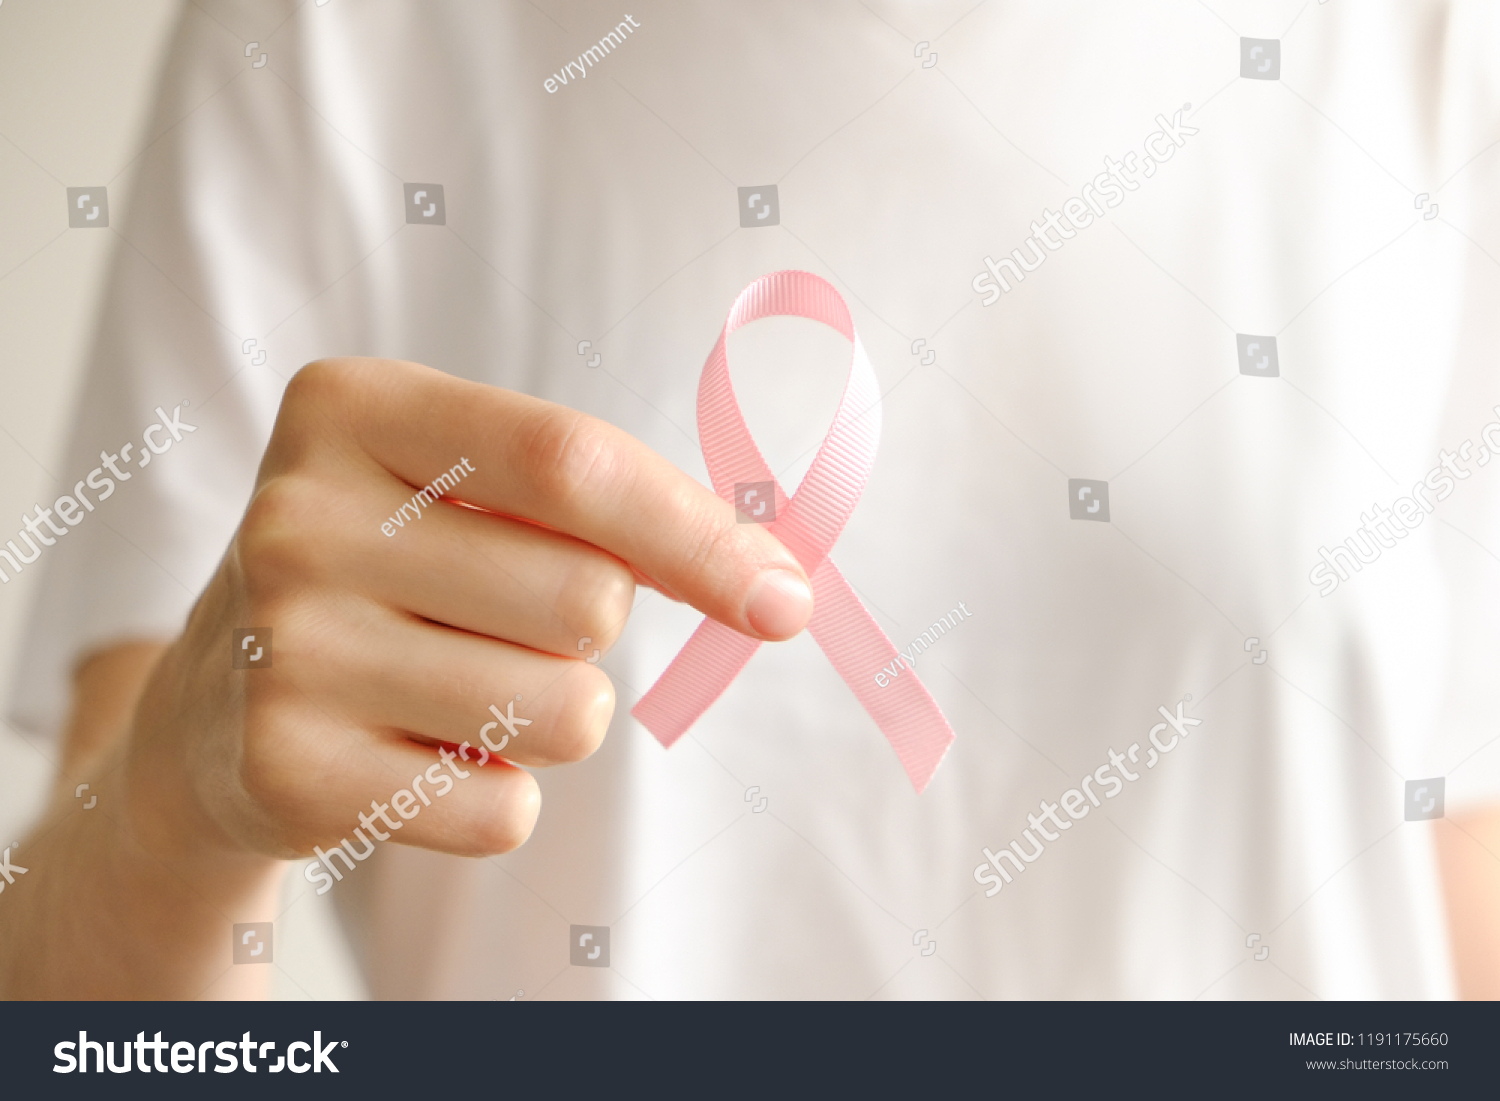 Woman in blank white t-shirt holding pink colored ribbon, international symbol of breast cancer awareness & moral support for survivors. Isolated background, copy space, close up, top view fat lay. #1191175660